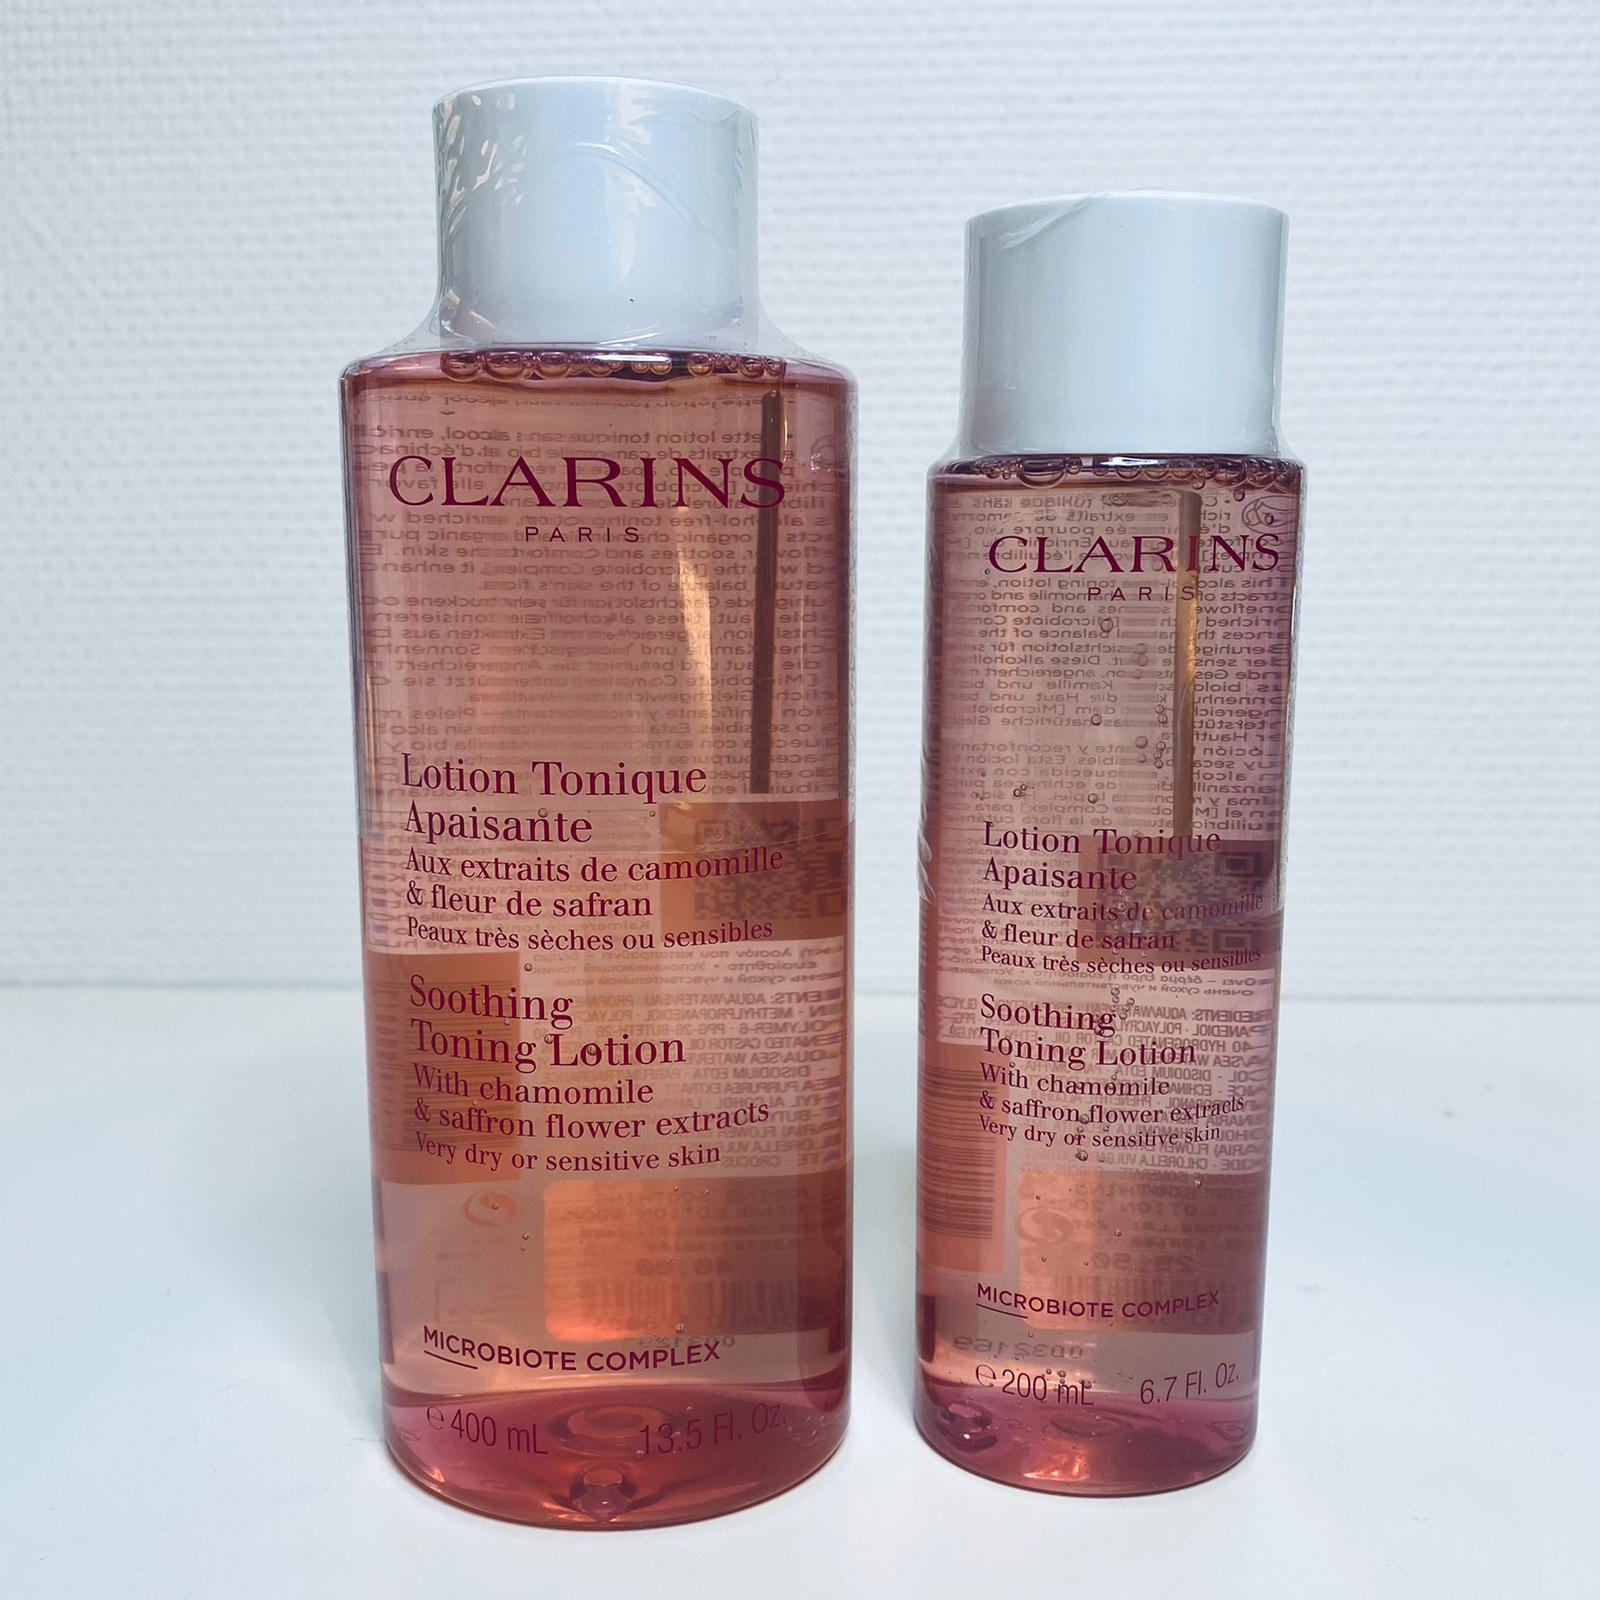 Clarins sooting toning lotion very dry or sensitive skin 400 ml